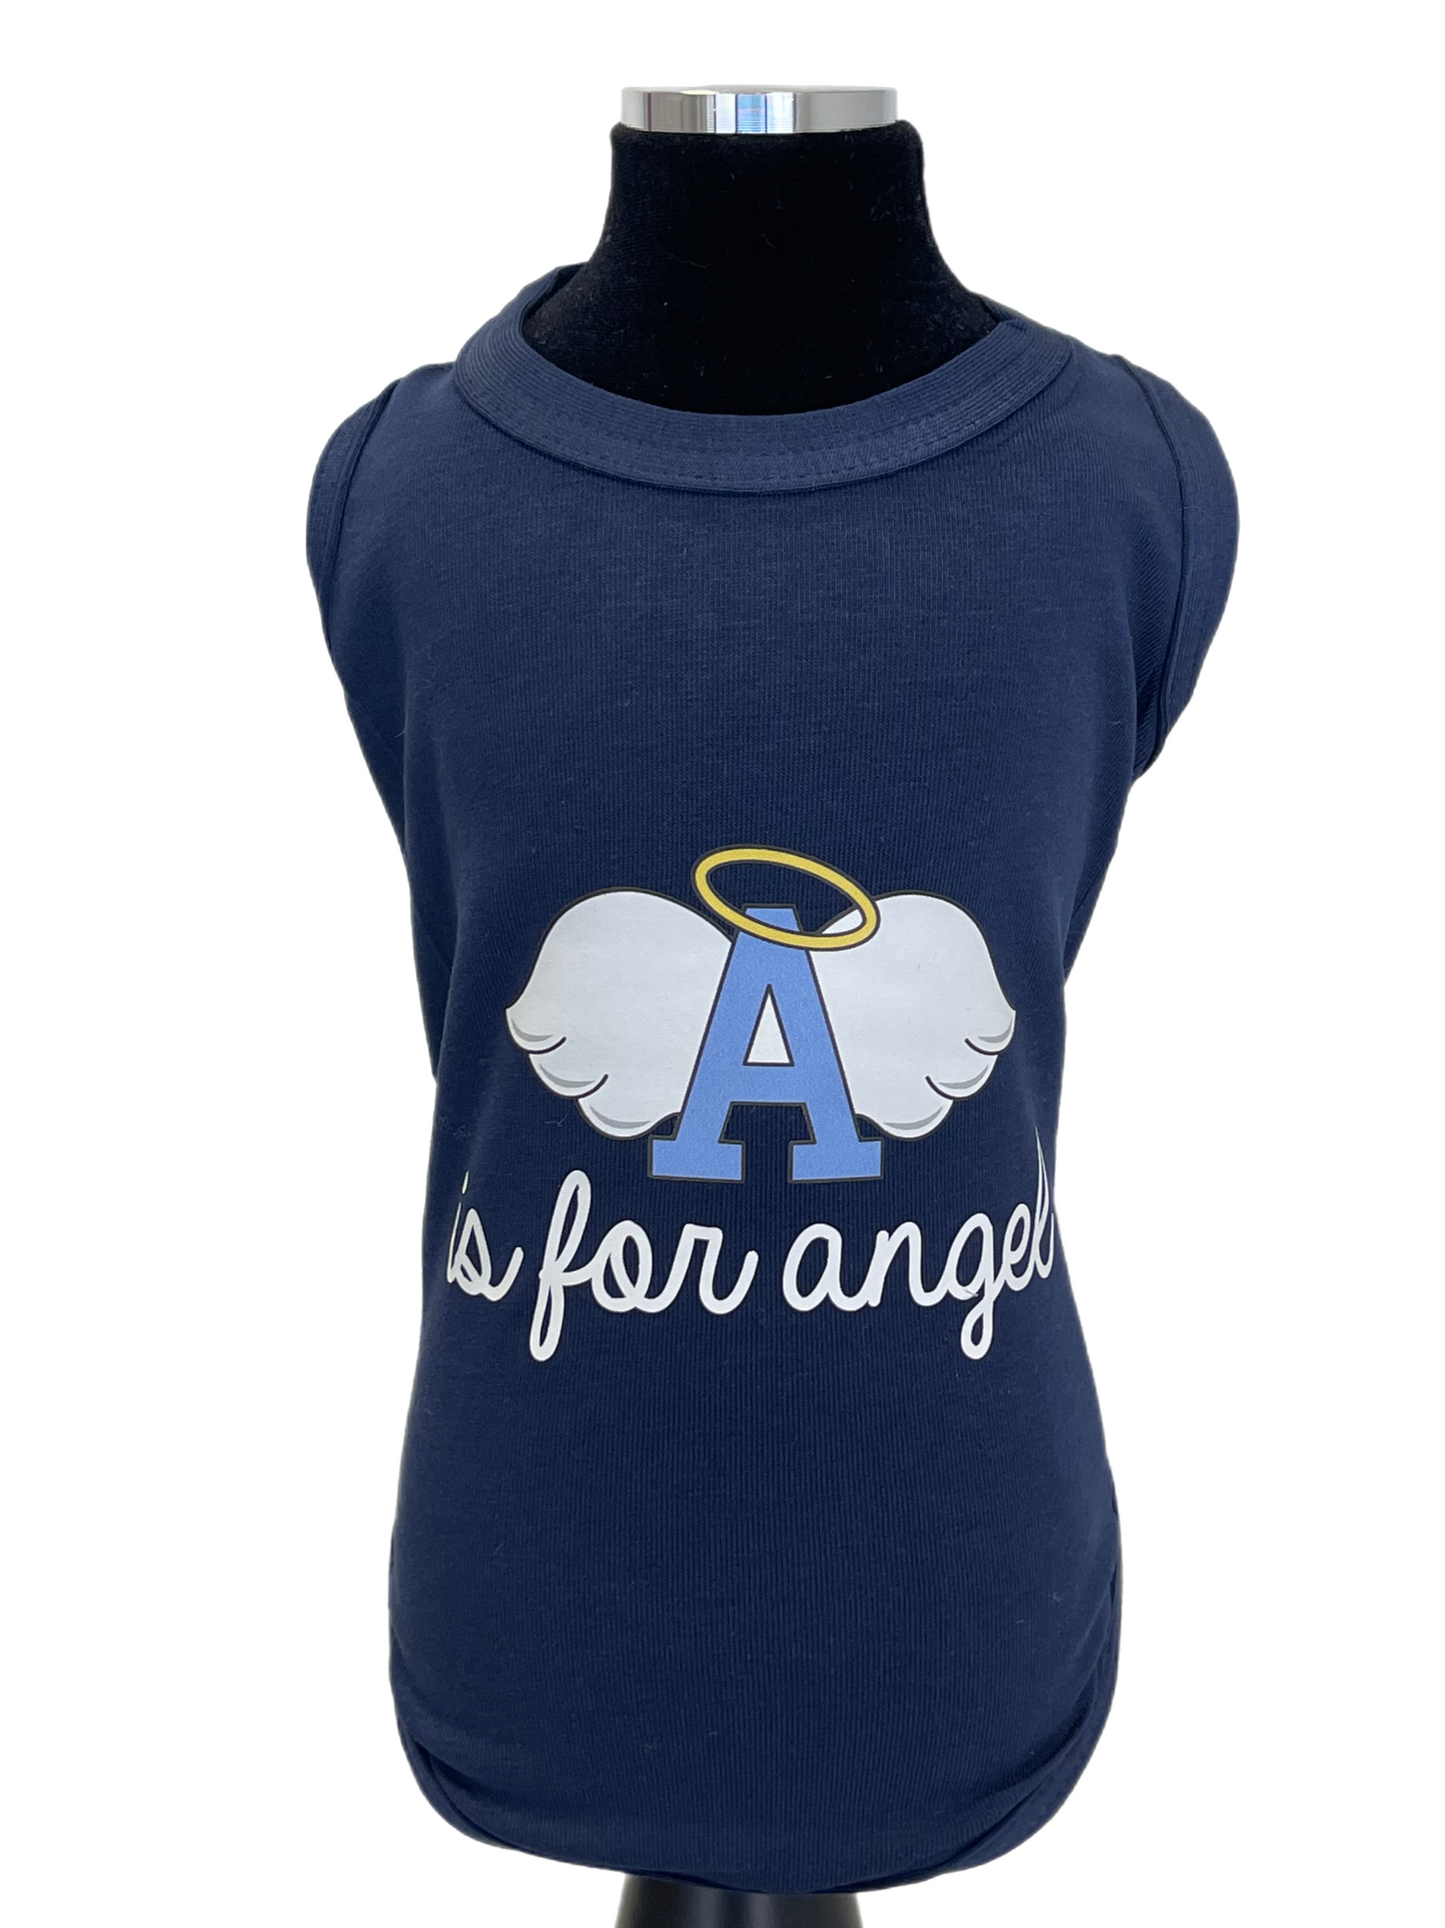 BLUE ANGEL T-Shirt - Luxury clothing for dogs - Made in Italy